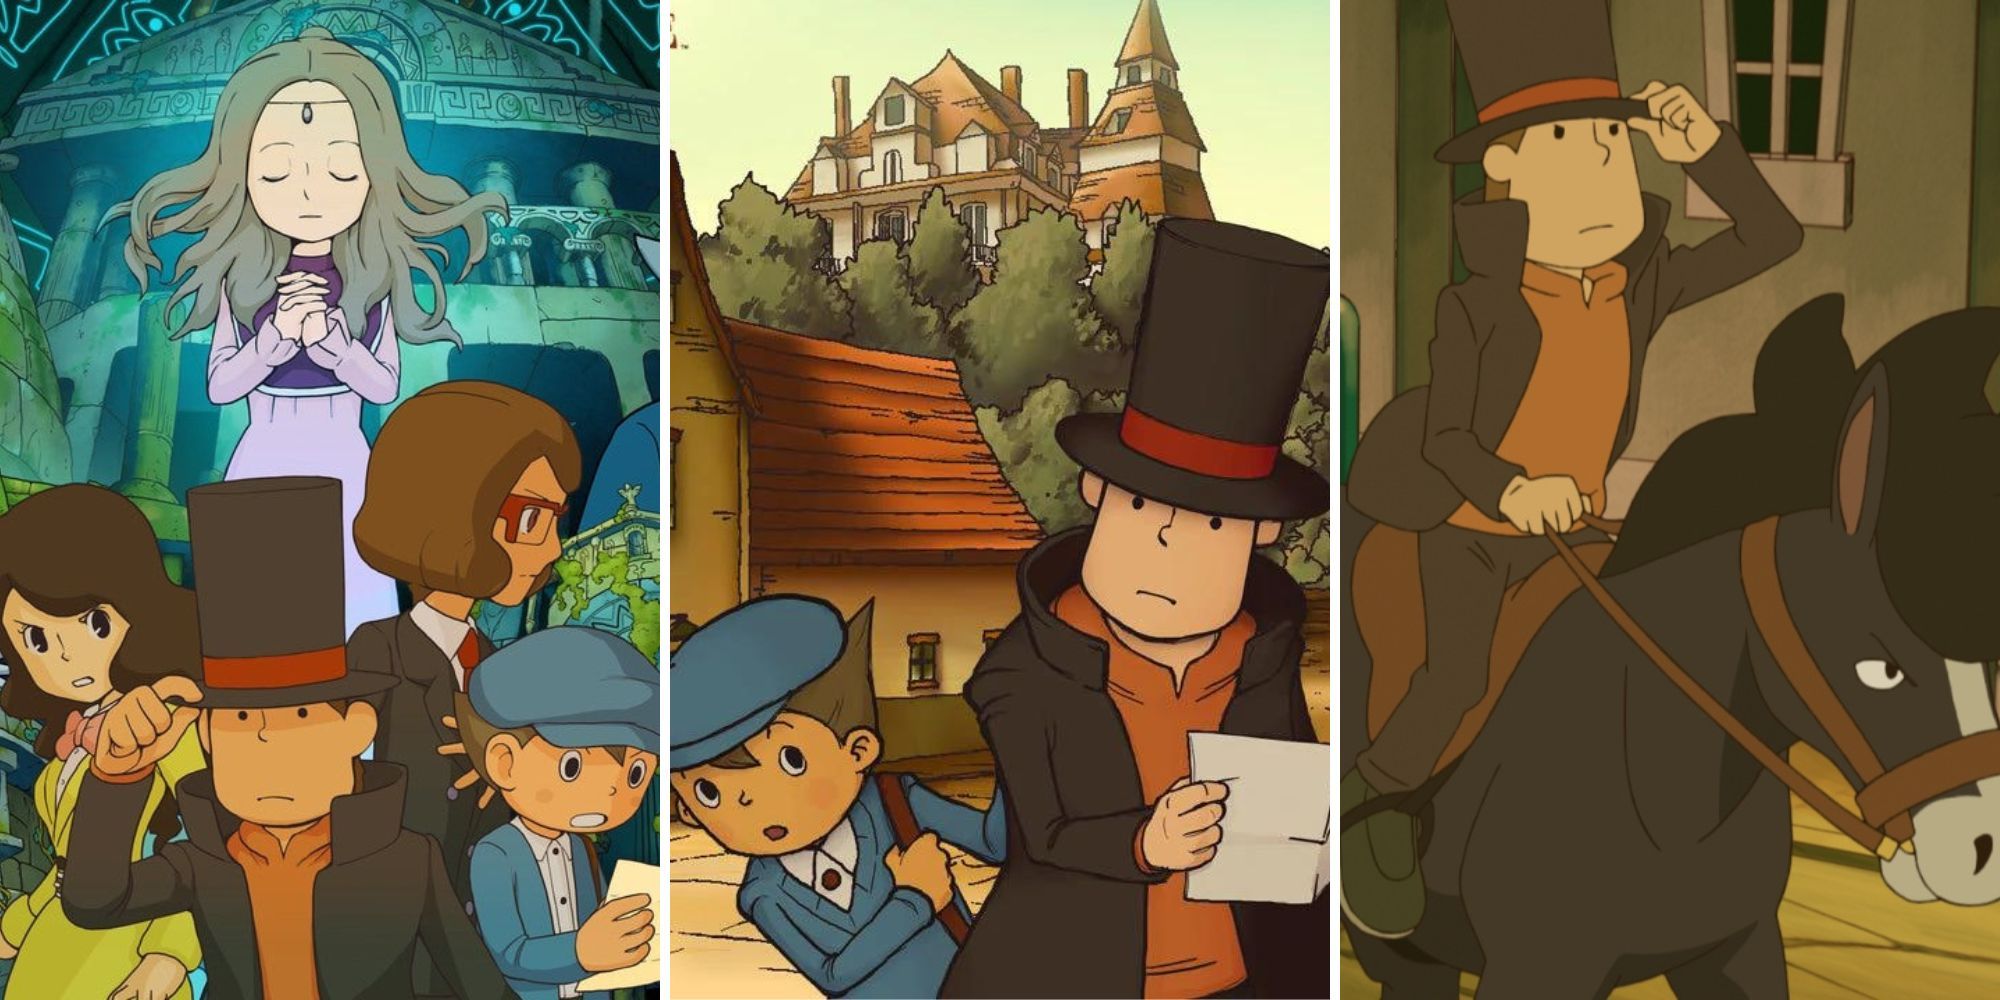 A grid of three Professor Layton games including Professor Layton And The Azran Legacy, Professor Layton And The Curious Village, and Professor Layton And The Miracle Mask